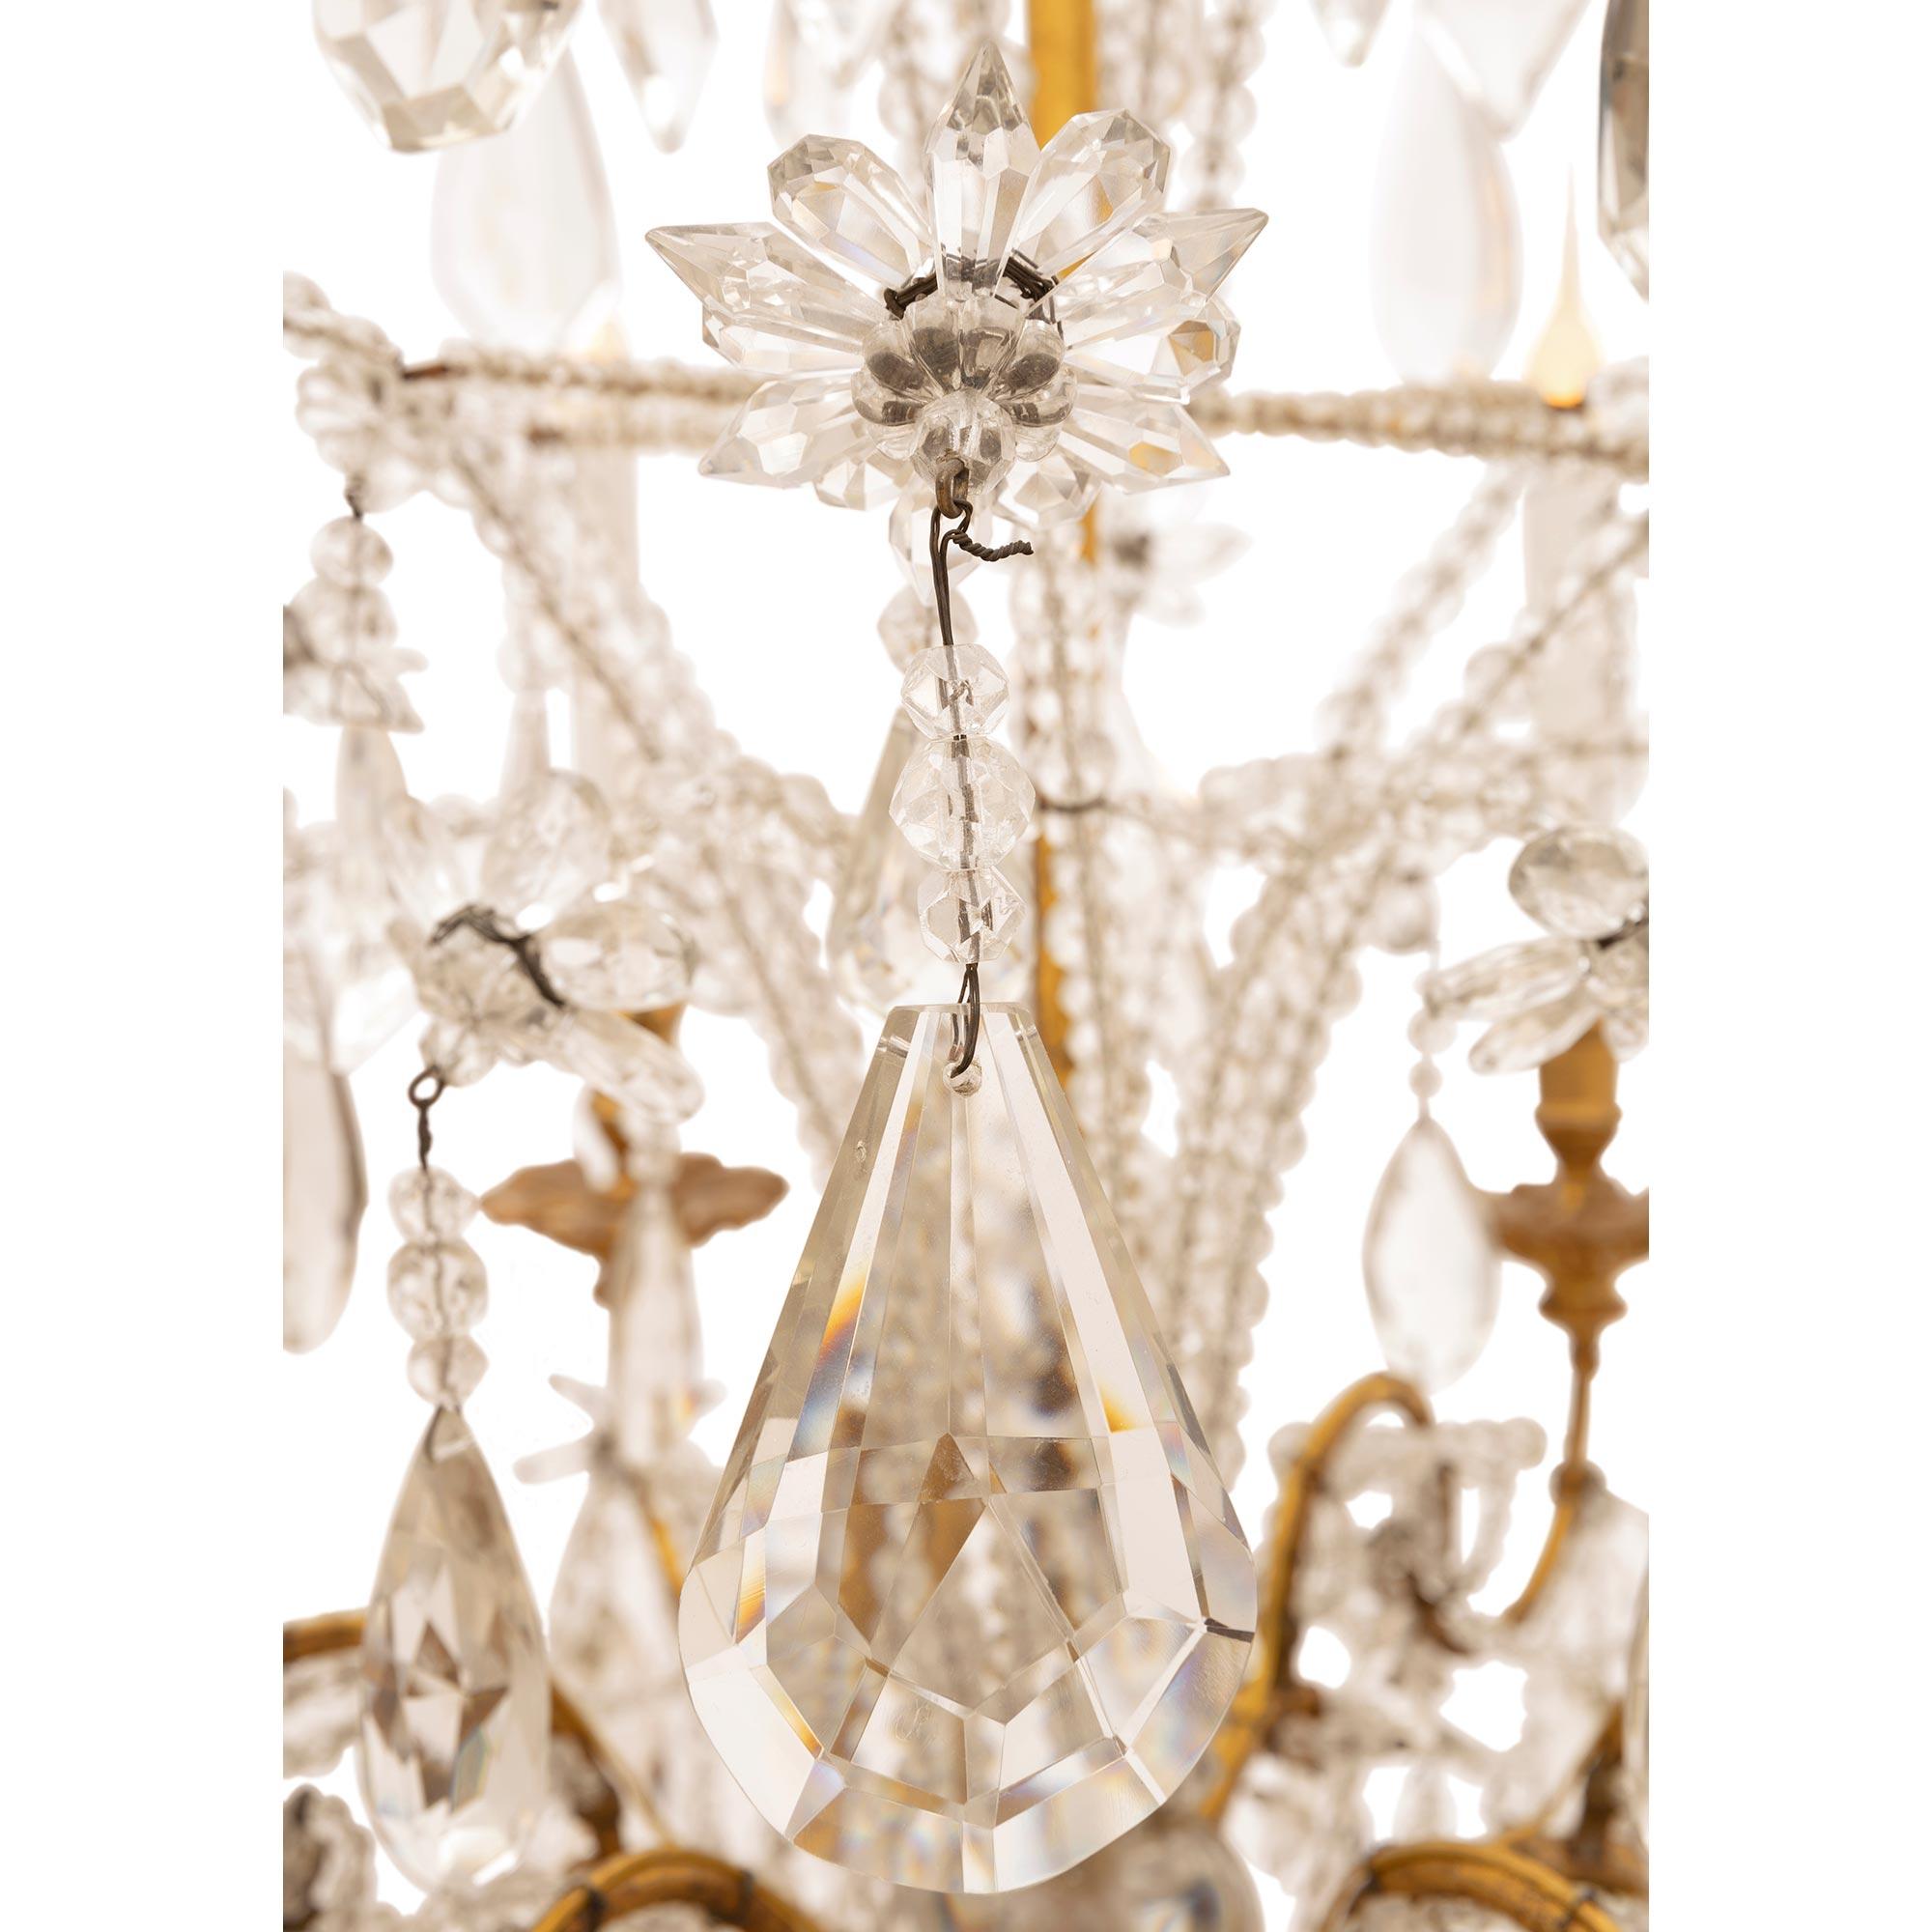 Italian Early 19th Century Crystal Chandelier from the Torino Region For Sale 2